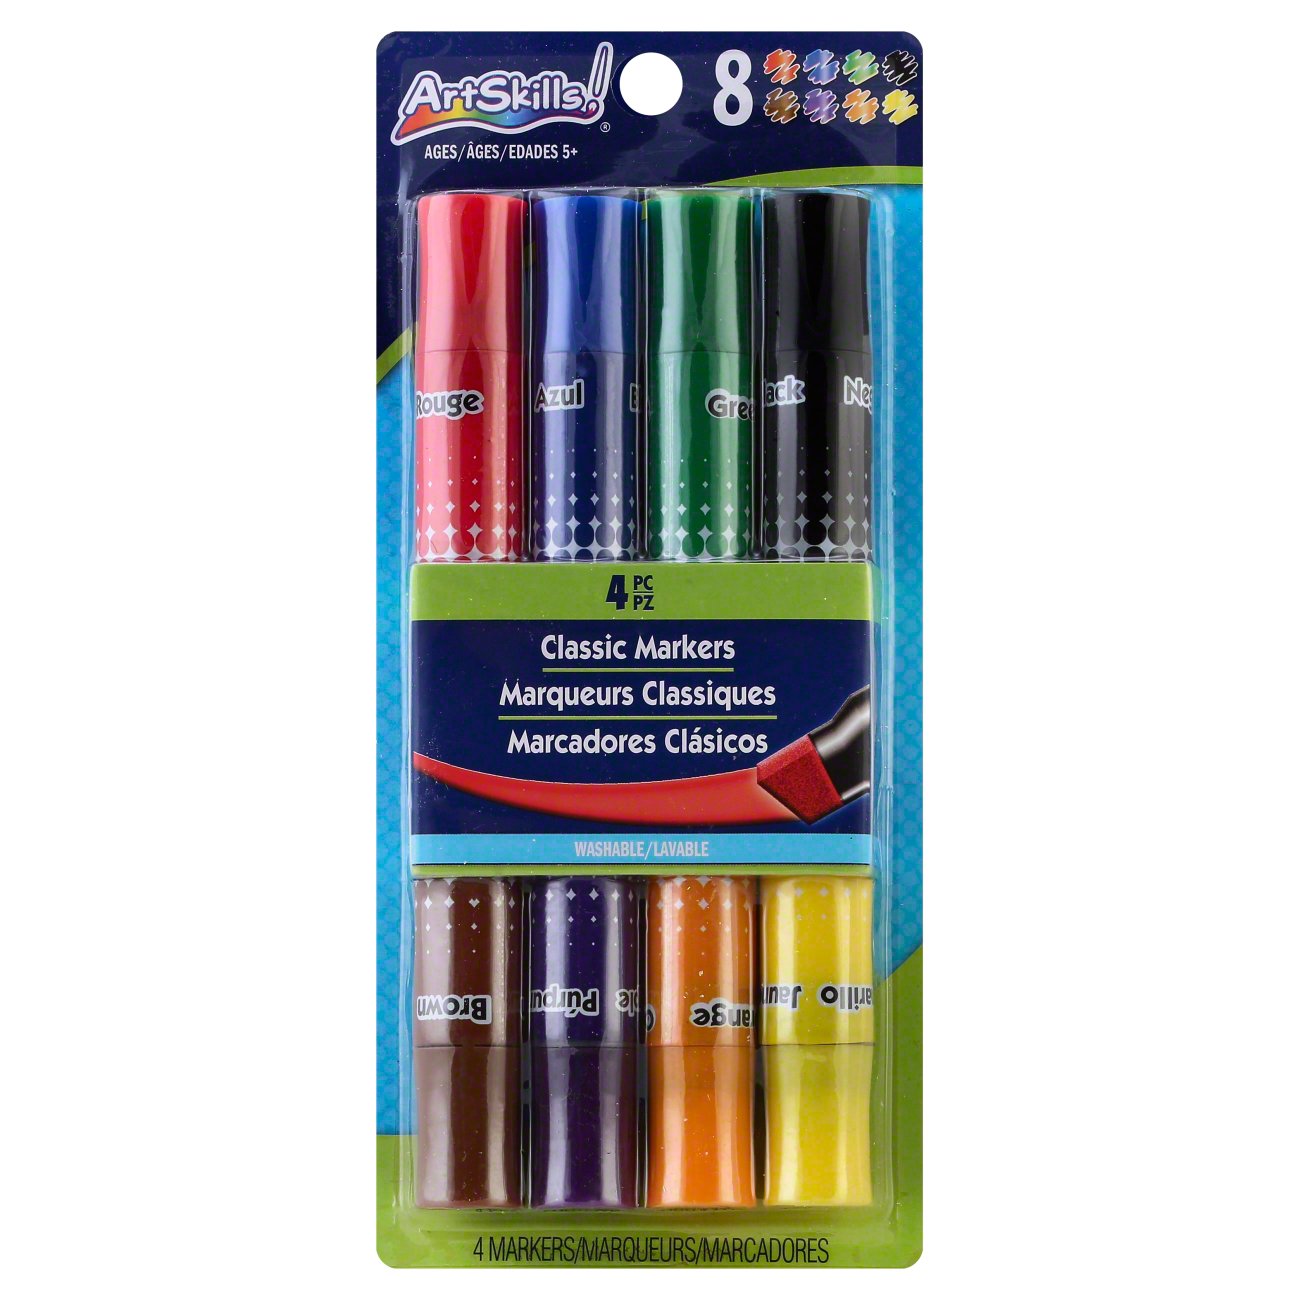 LOT OF 23 PACKS ARTSKILLS CLASSIC POSTER MARKERS 8 COLORS PER PACK